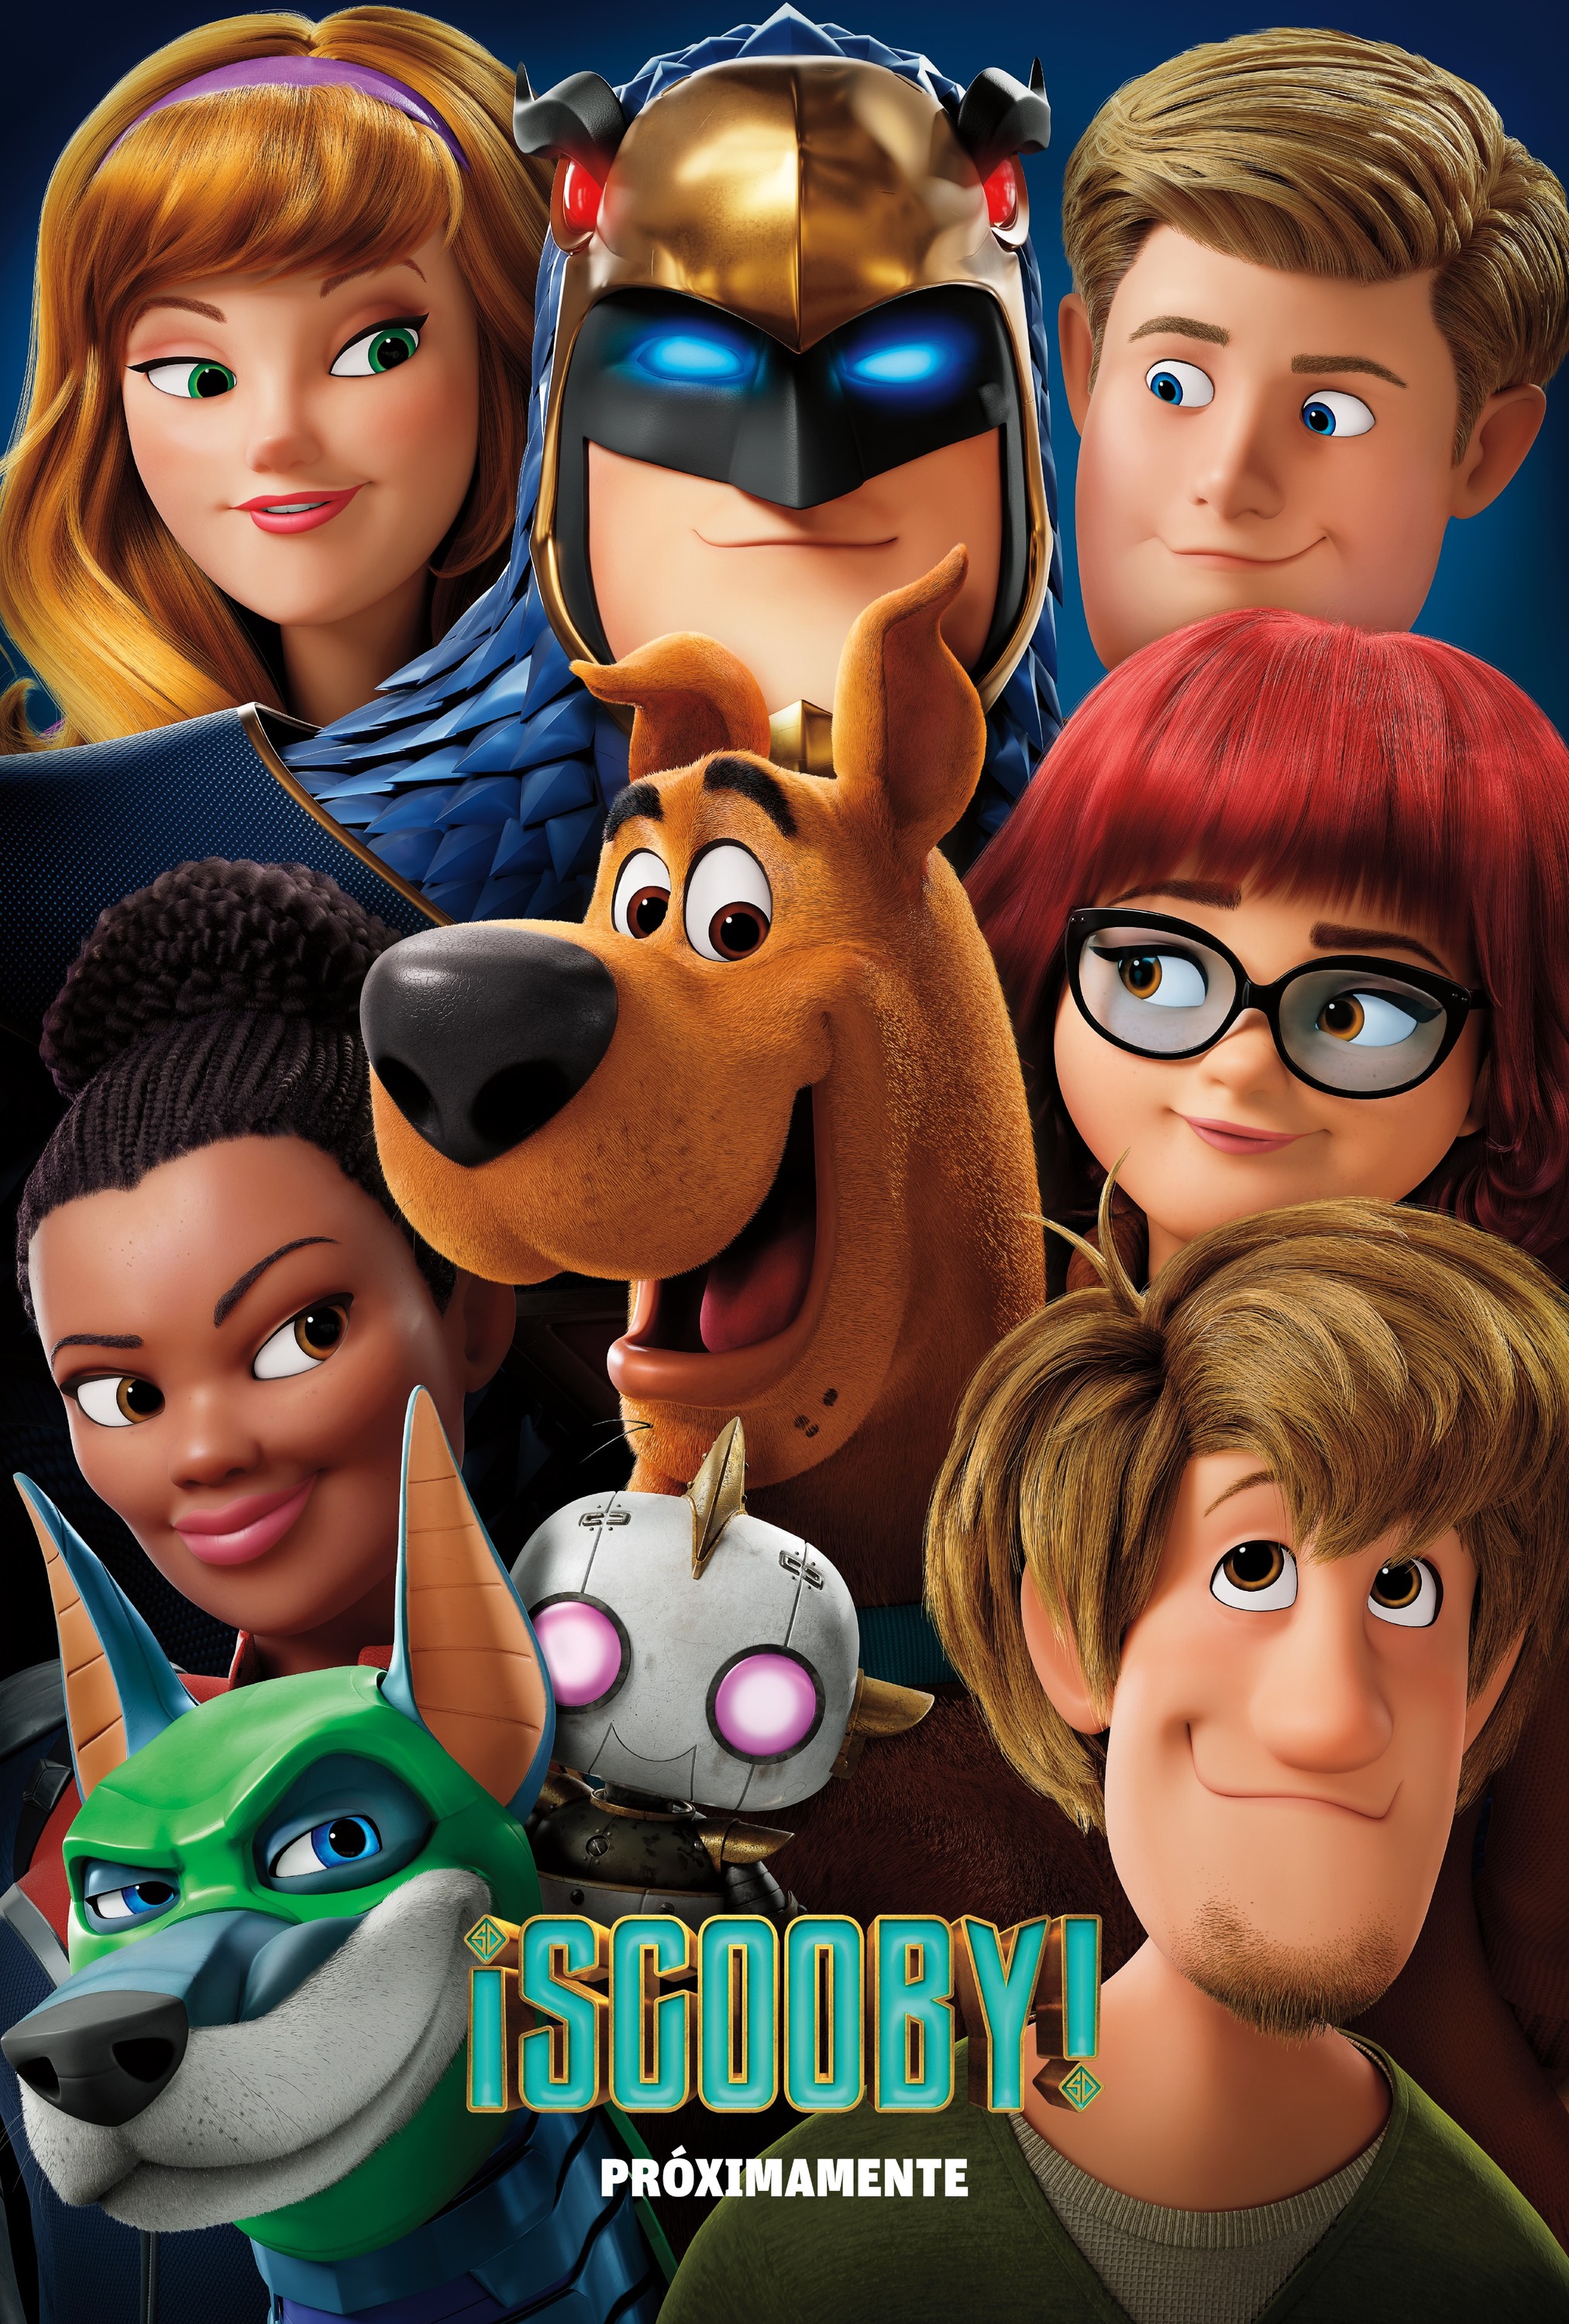 Mega Sized Movie Poster Image for Scoob! (#4 of 6)